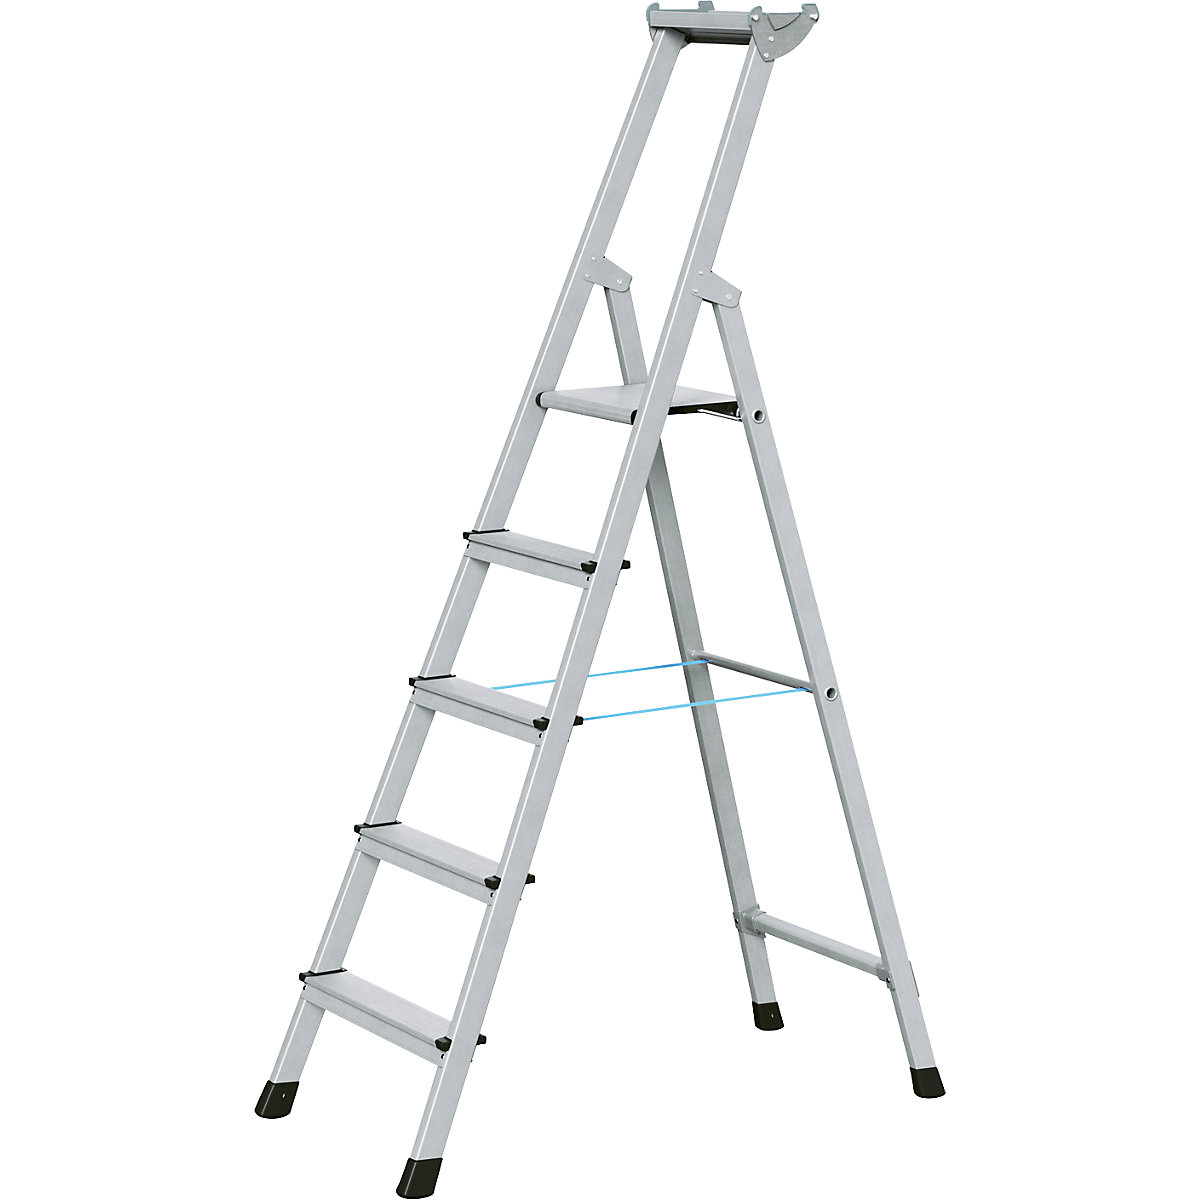 Professional step ladder, single sided access – ZARGES